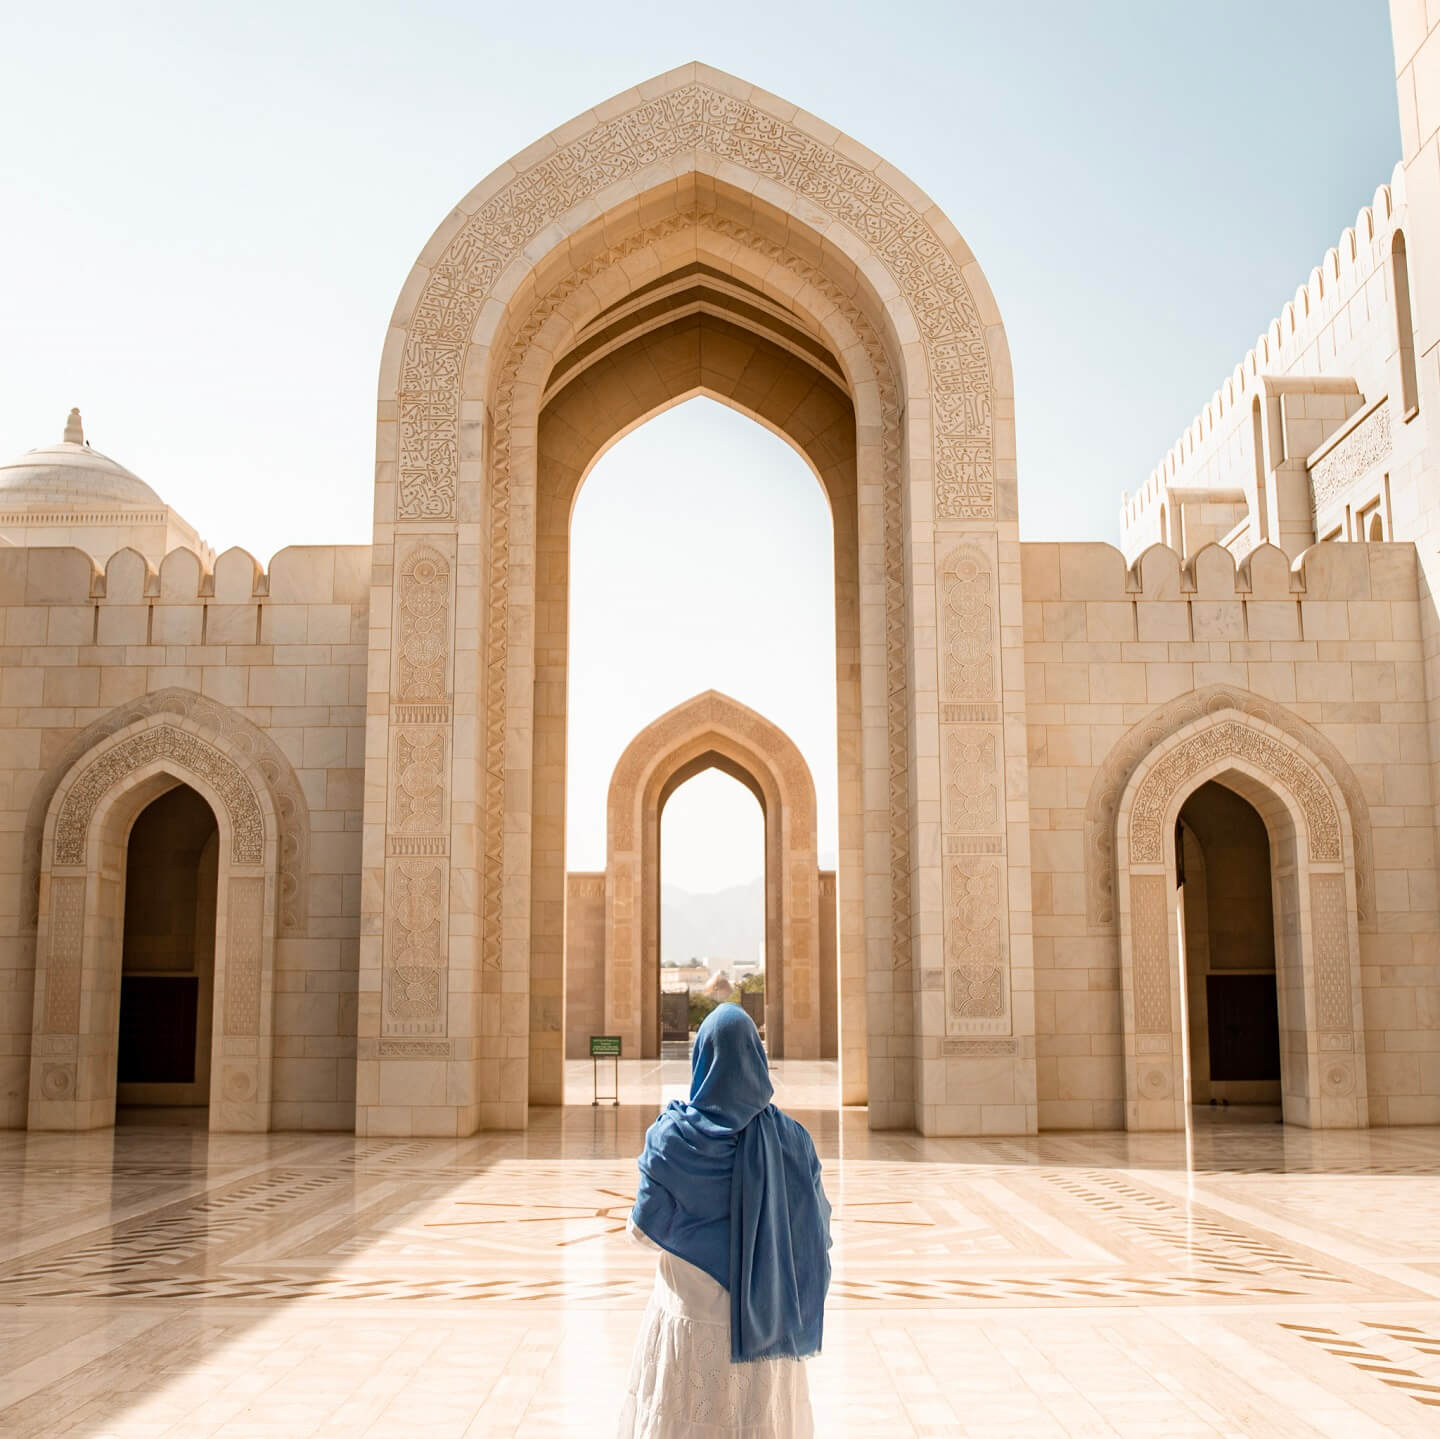 Sultan Qaboos Grand Mosque is a must stop during your Oman road trip